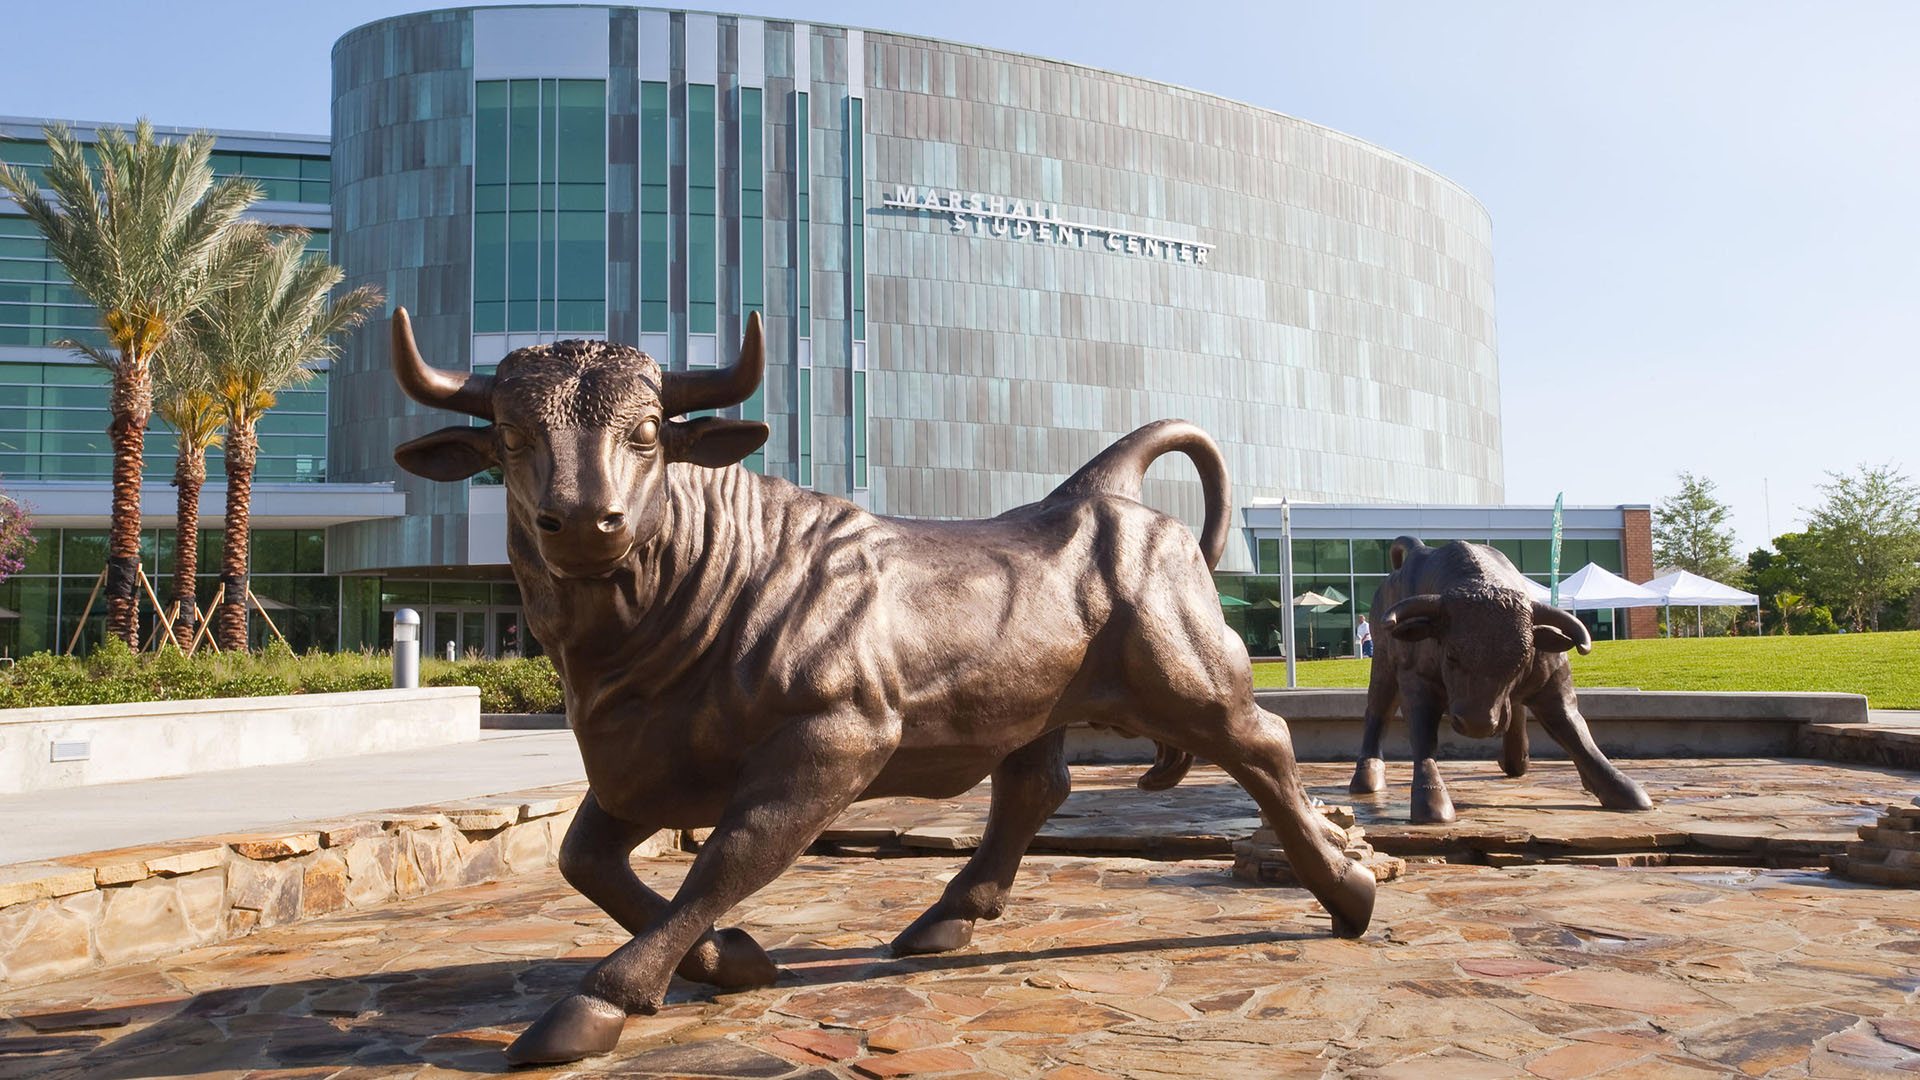 The University of South Florida, home of the Bulls, Tampa, FL